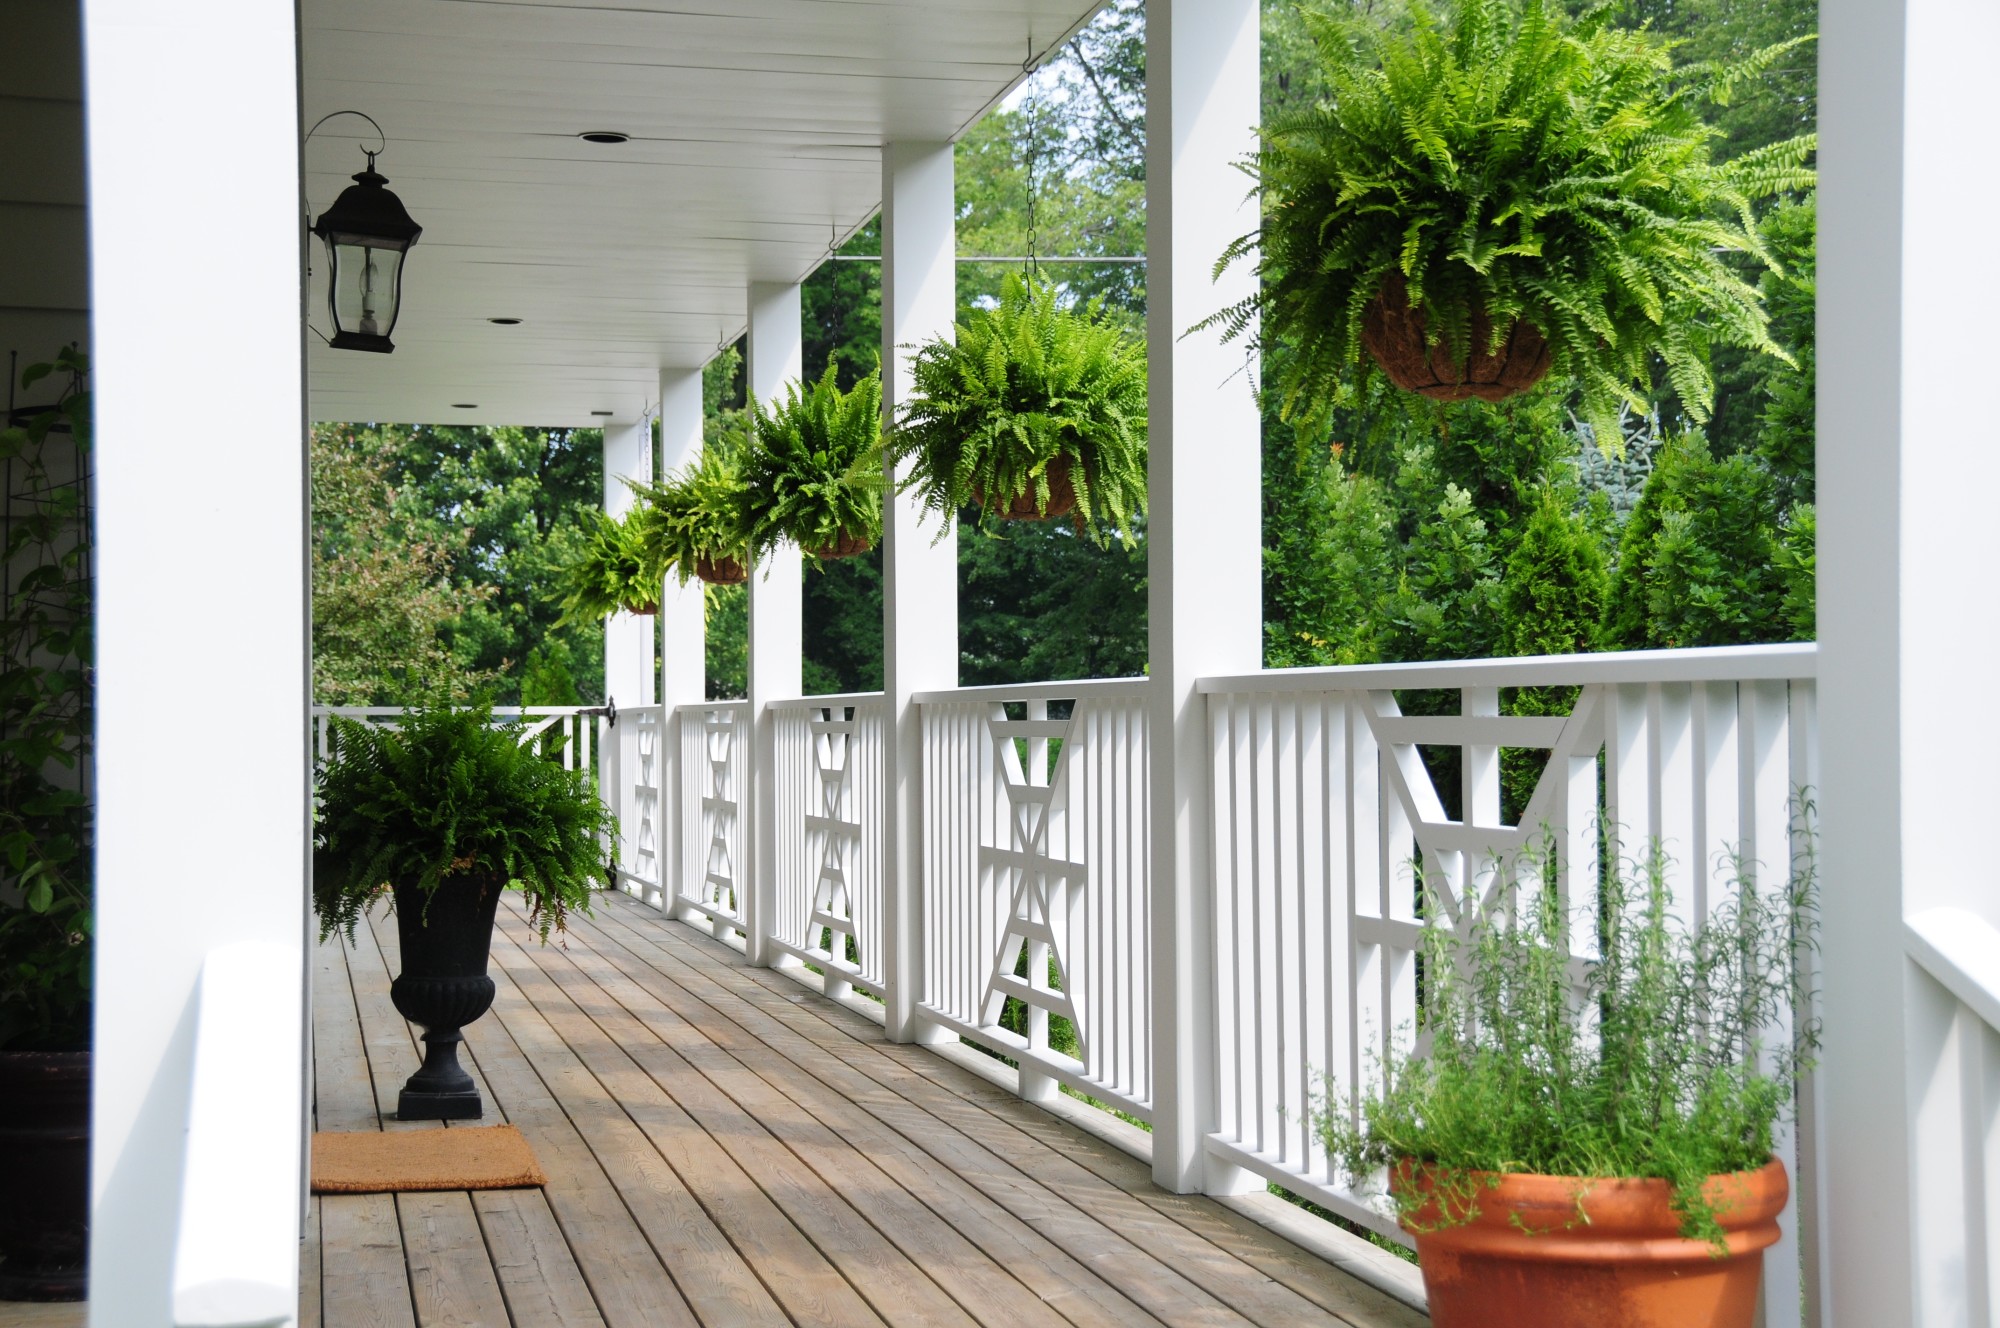 Hanging Flowers over a white porch railing